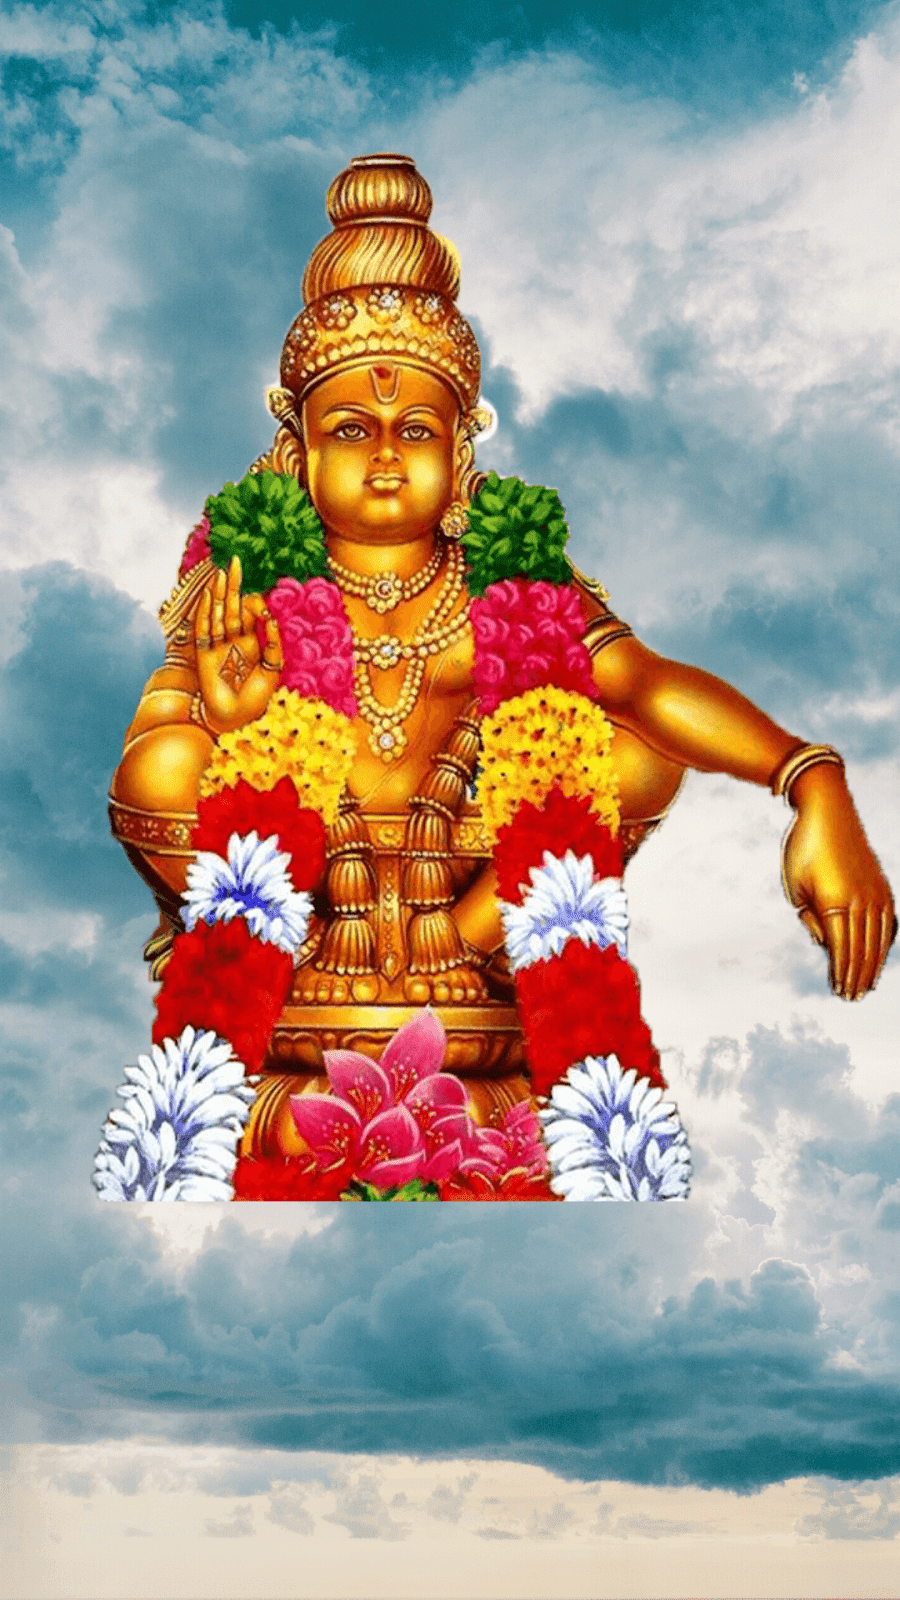 Ayyappa Photos, Lord Ayyappa Wallpapers, Photo Gallery, Pictures, Stills